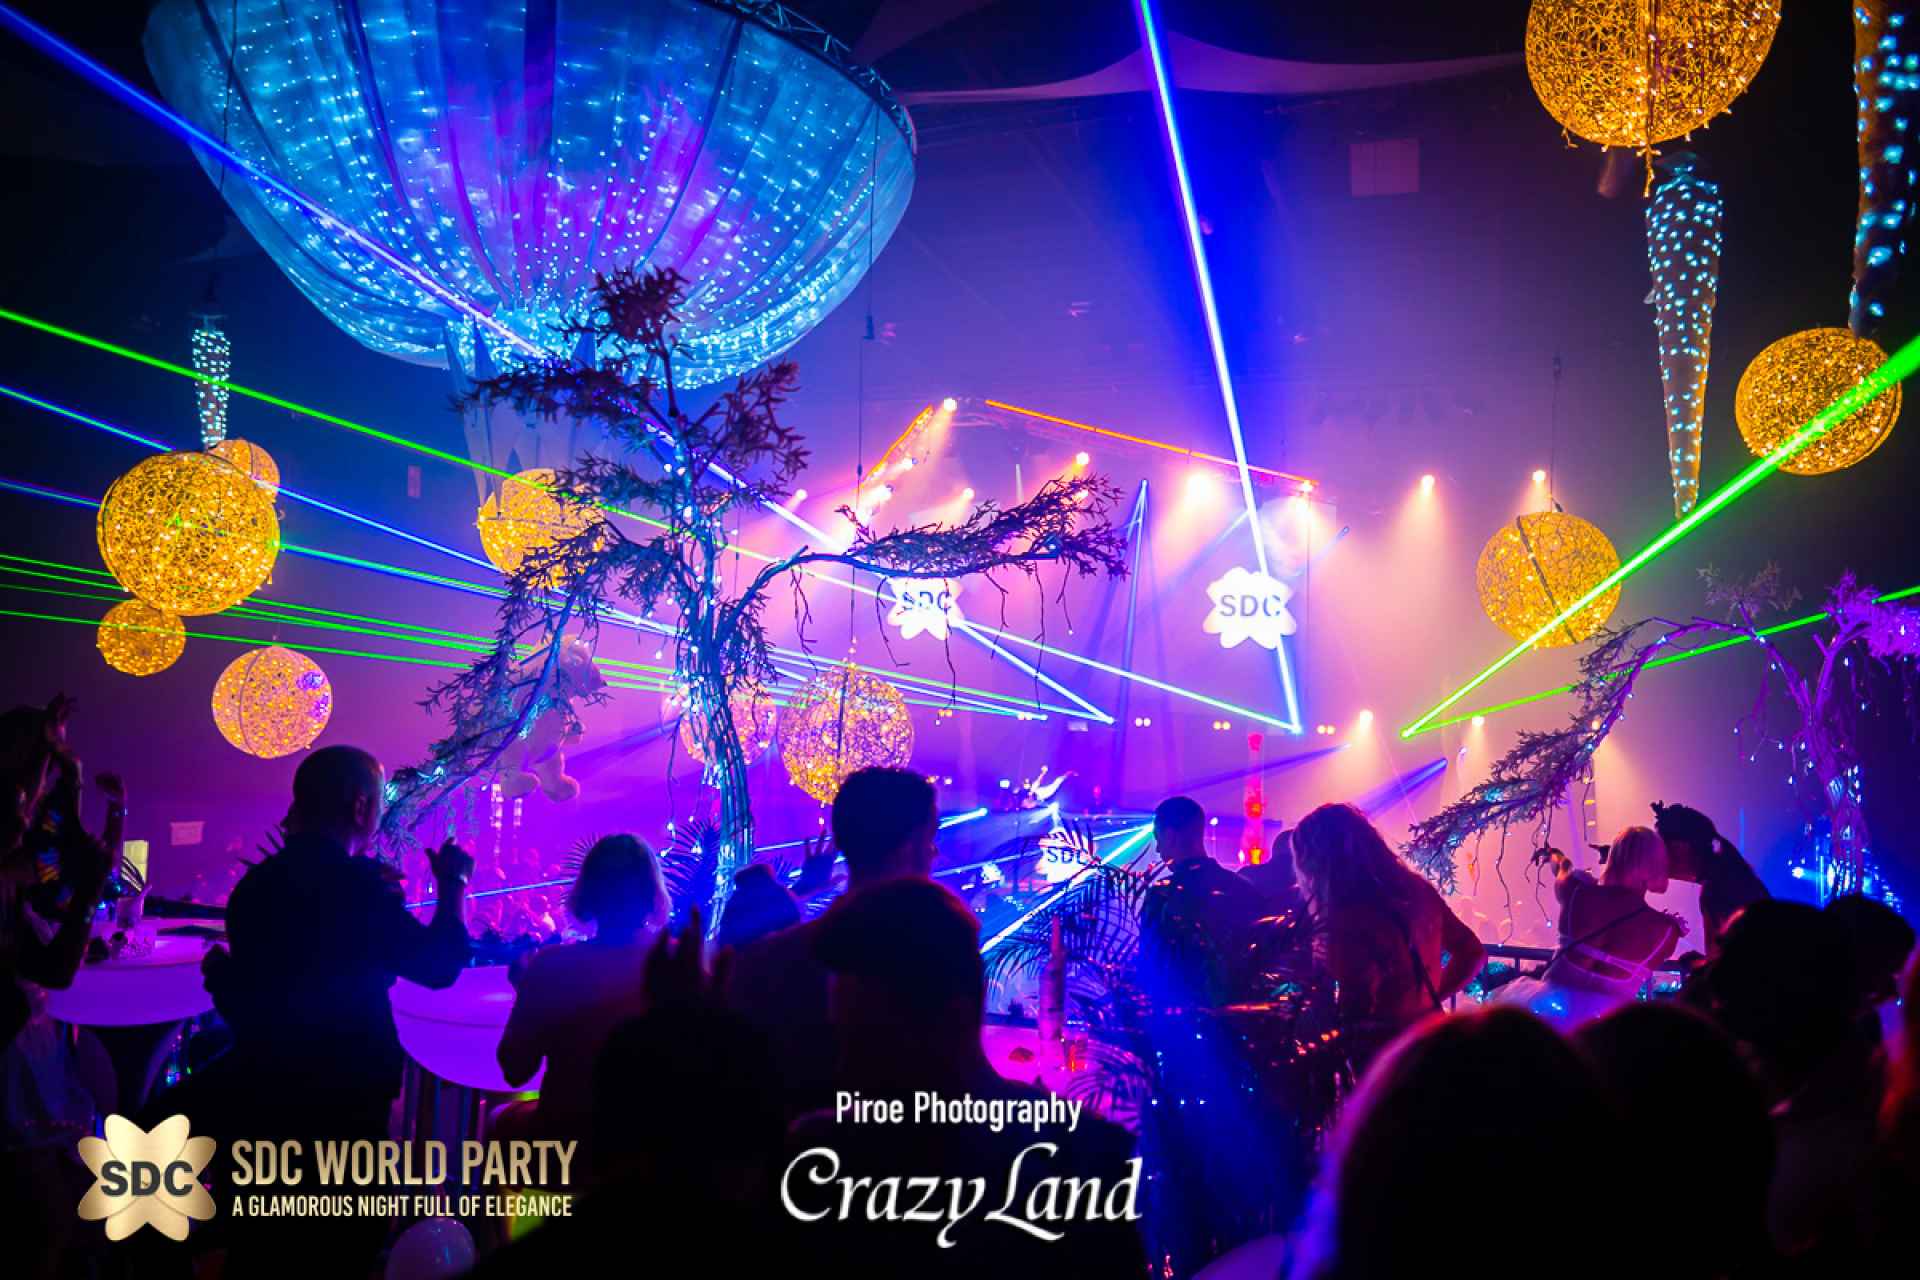 The SDC World Party 2019